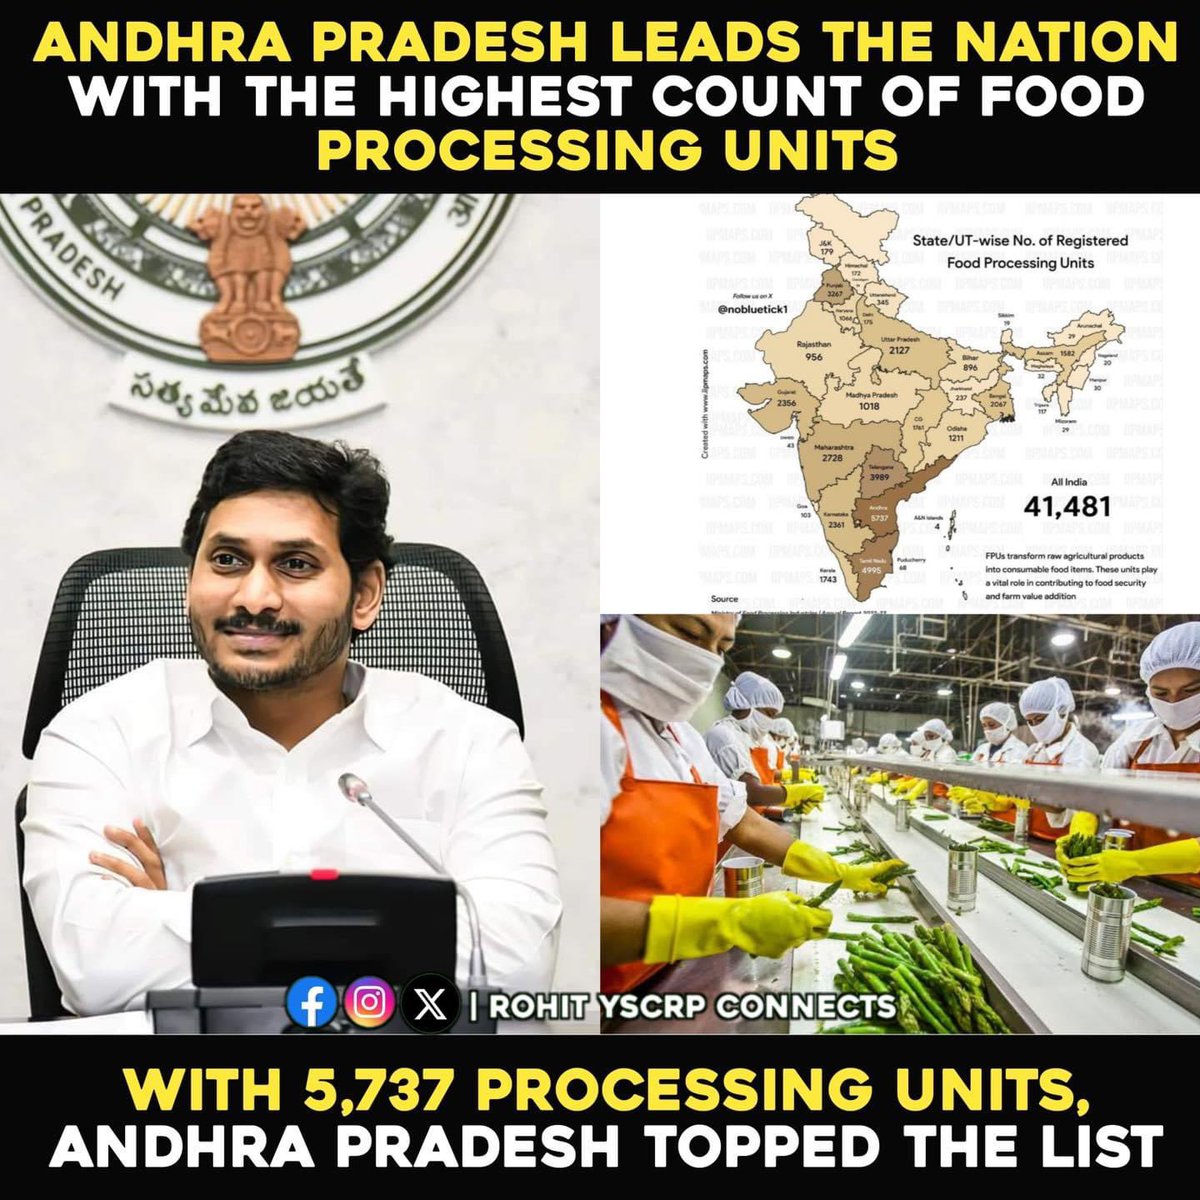 #AndhraPradesh is The Food Processing Unit Hub of India . it Creates Employment to Lakhs of People in the state and Generates Huge Revenue to the Government

#YSJaganAgainIn2024 #YSJaganDevelopsAP  #HiddenFactsbyYellowMedia #AndhraProgress #VoteForFan #YSJaganMarkGovernance